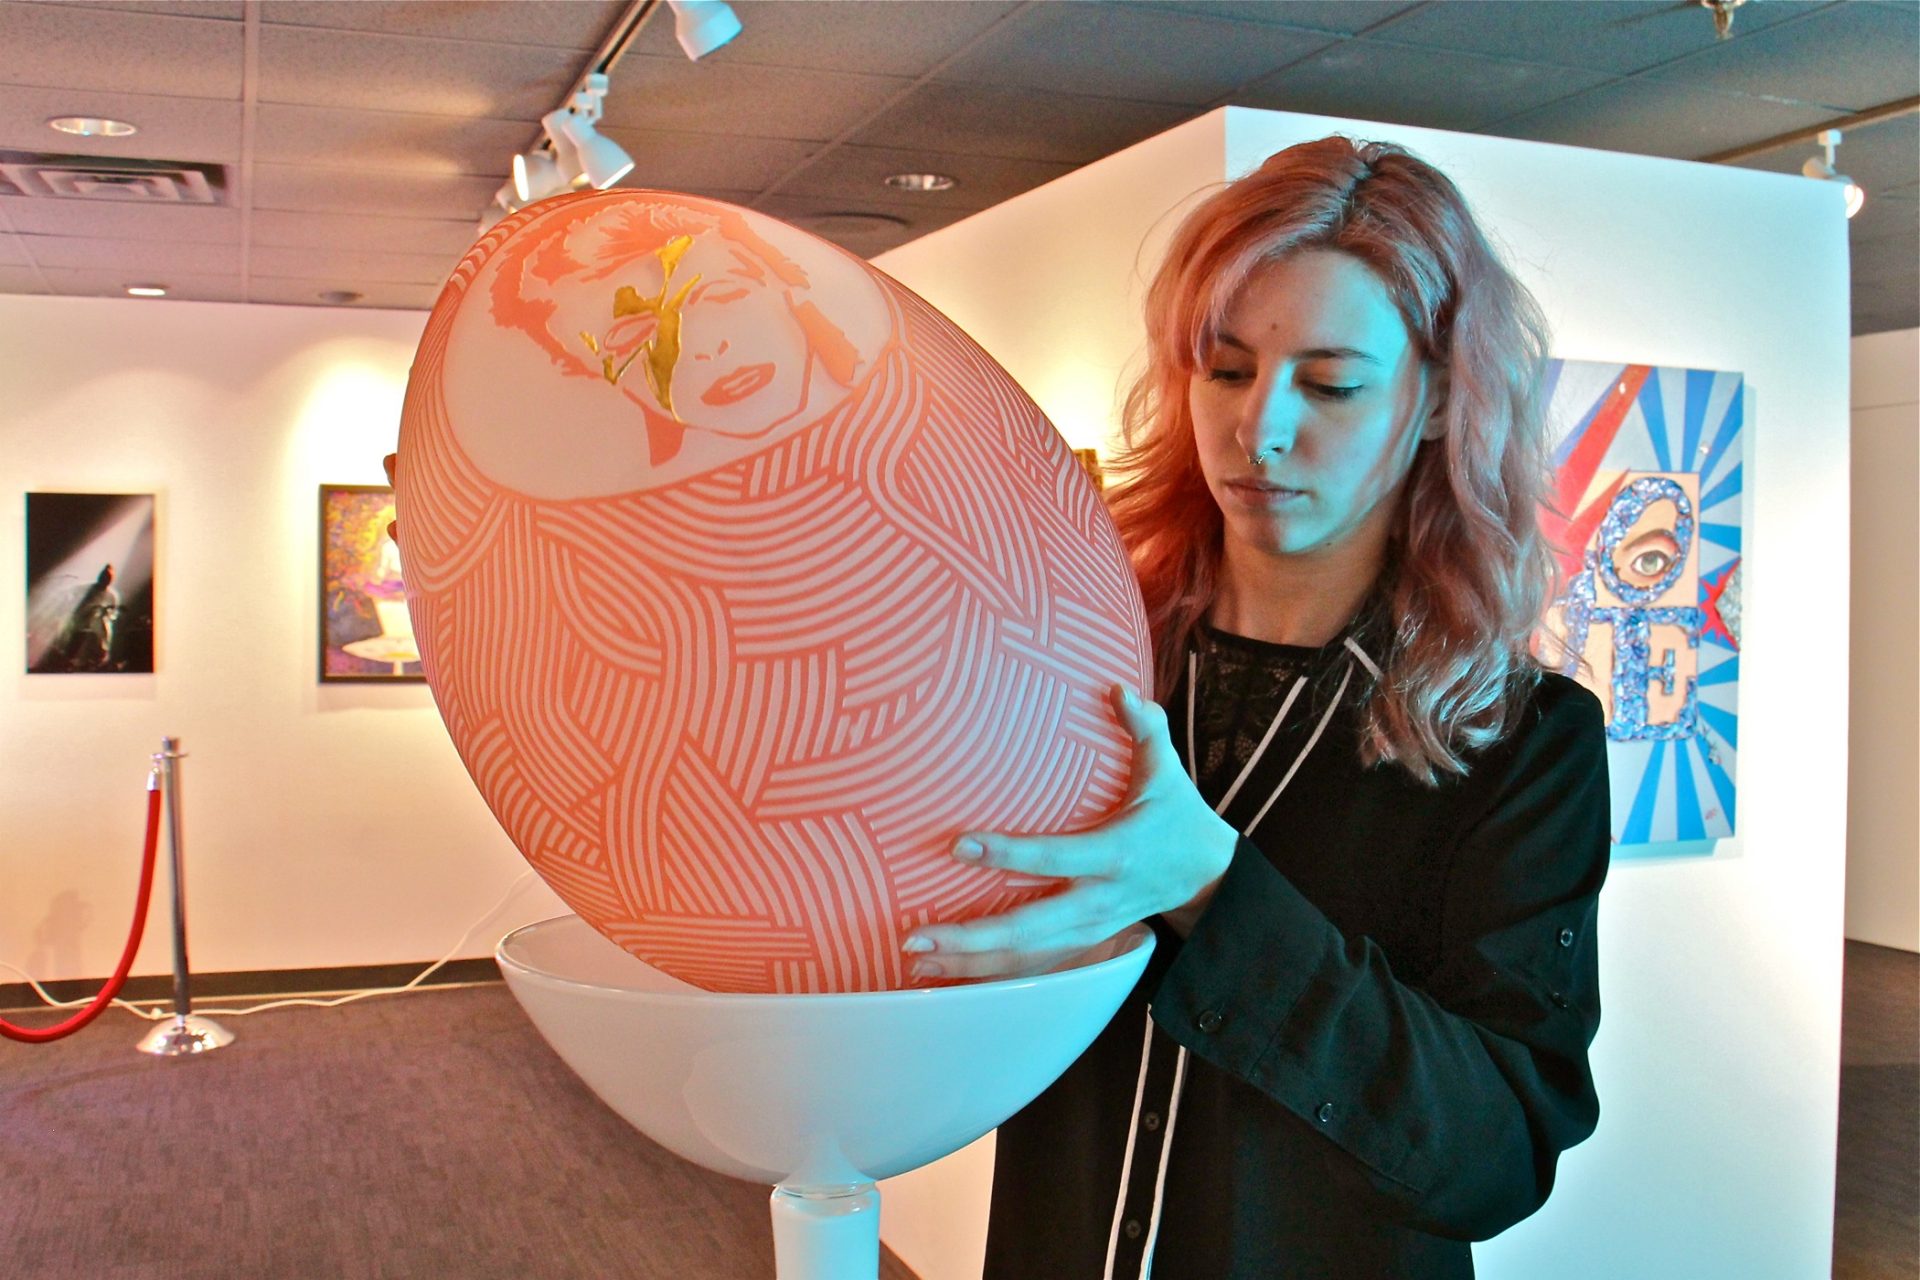 Curator Jocelyn Beaucher places Morgan Peterson's glass sculpture, 'Ziggy Stardust Modern Day Fabergé' part of the We Can Be Heroes exhibit at the Liberty Museum.